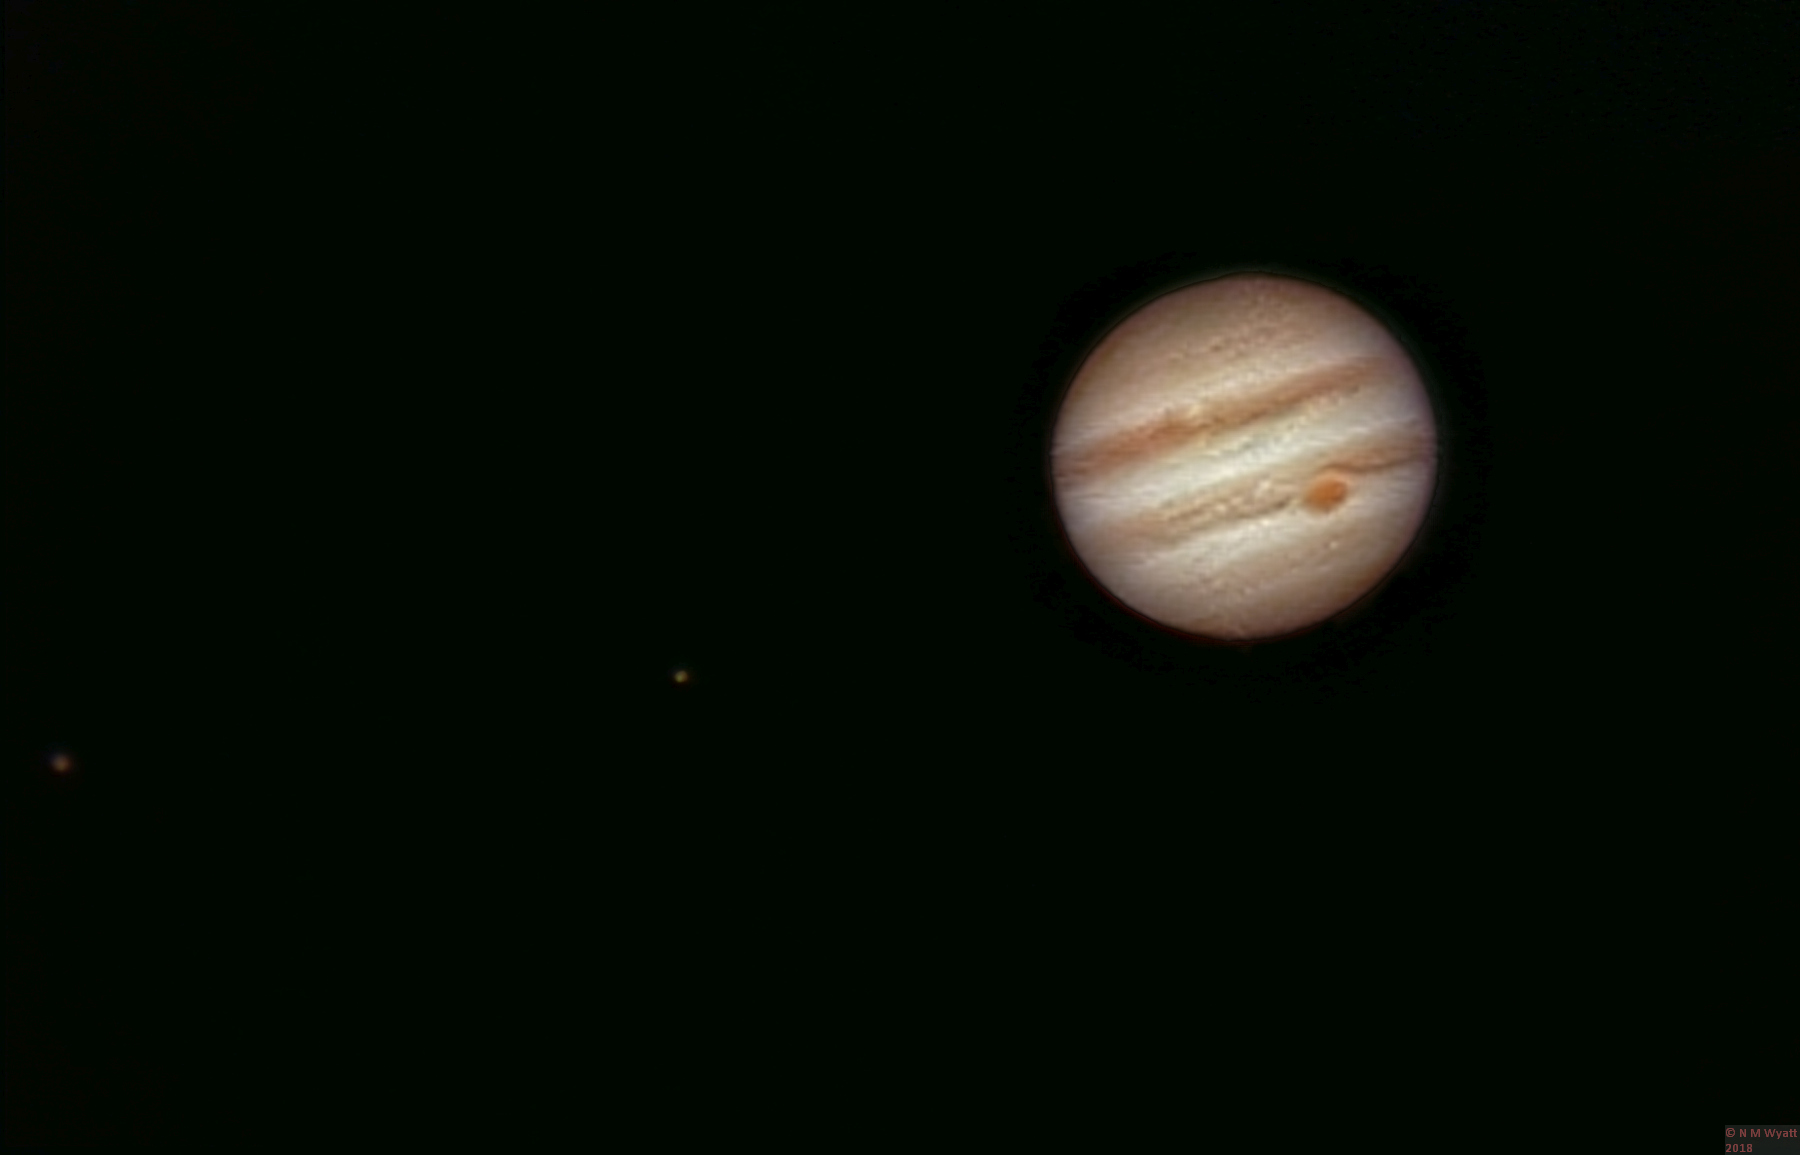 Ganymede, Io and Jupiter with the Great Red Spot